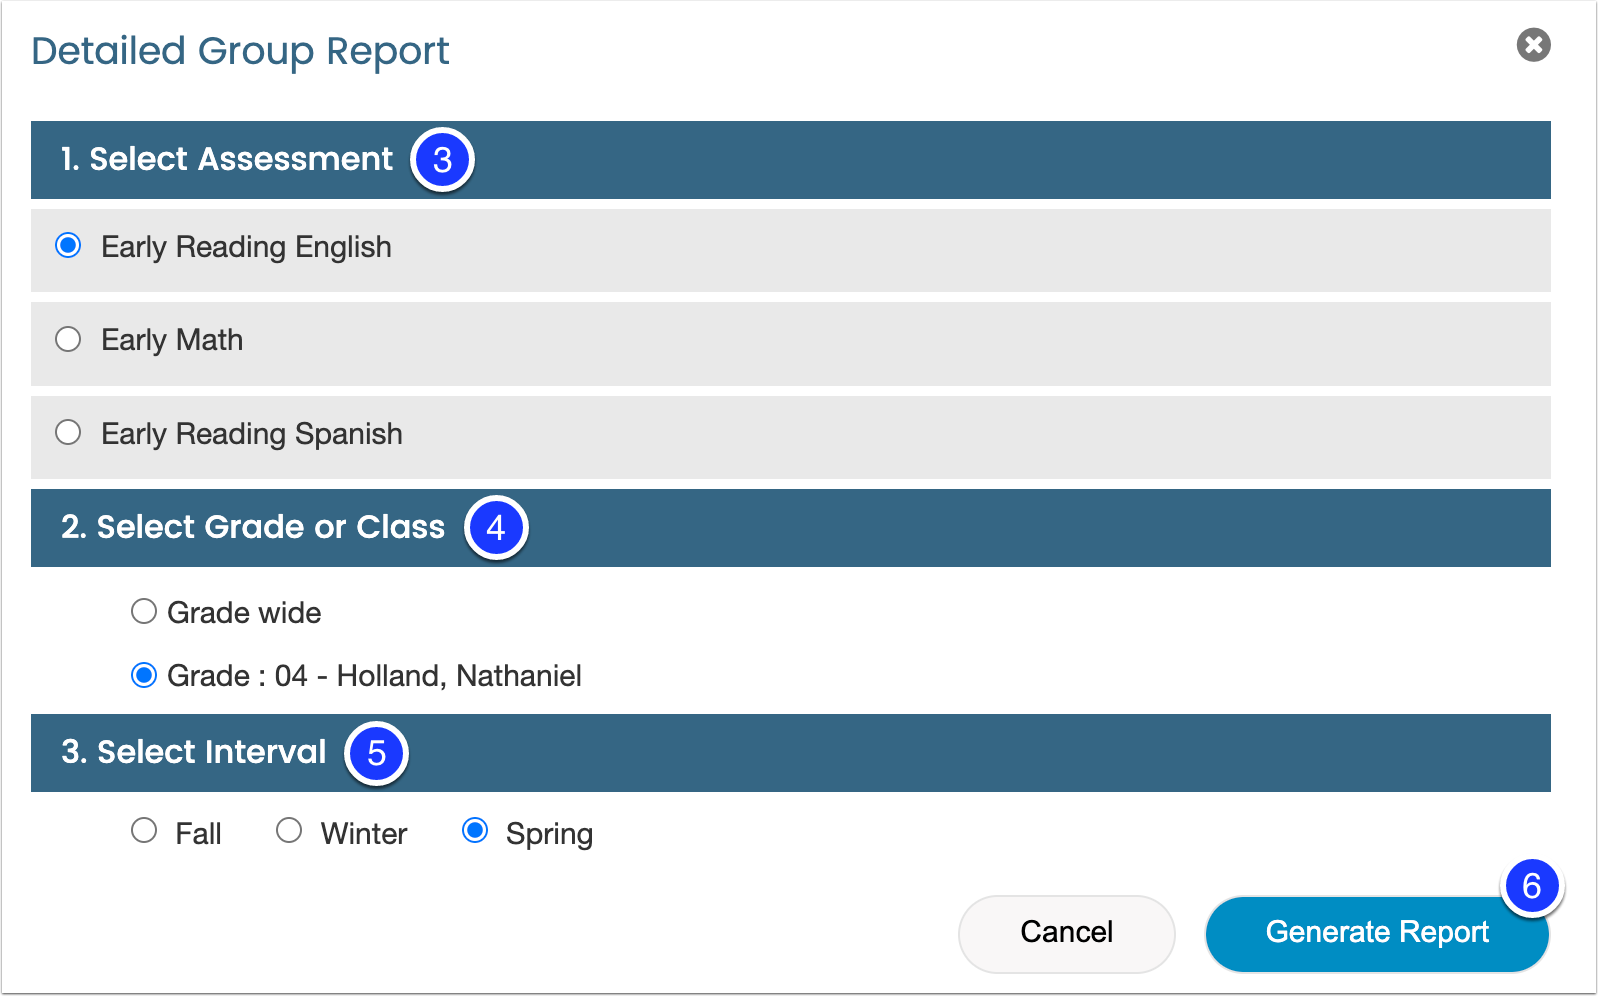 an image of the detailed group report detail selection moduled with select assessment marked as step 3, select grade or class marked as step 4, and select interval marked as step 5